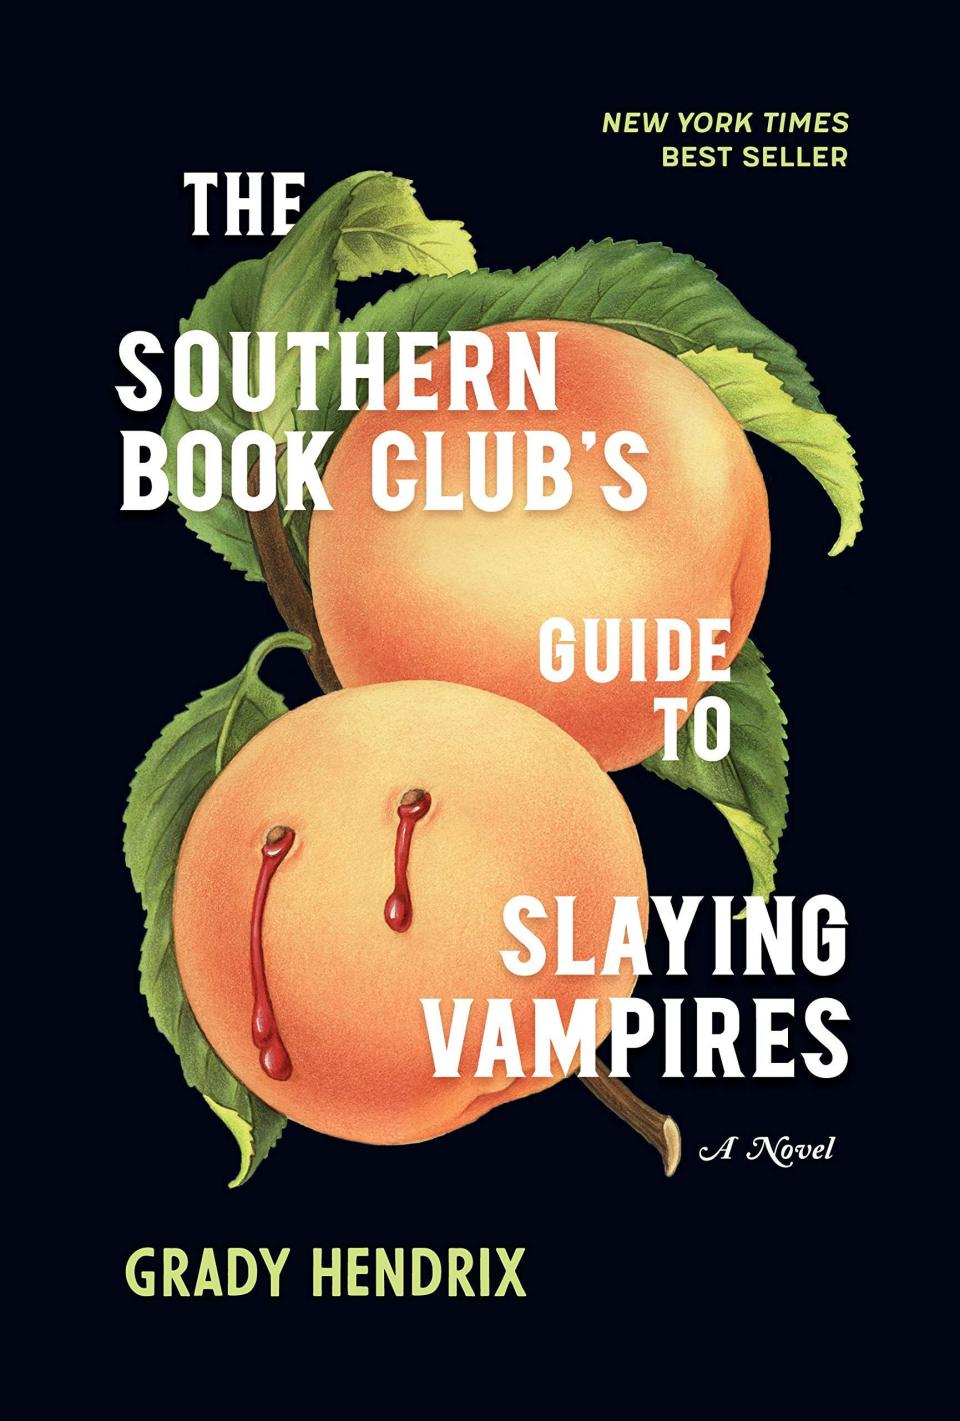 31) ‘The Southern Book Club’s Guide to Slaying Vampires’ by Grady Hendrix